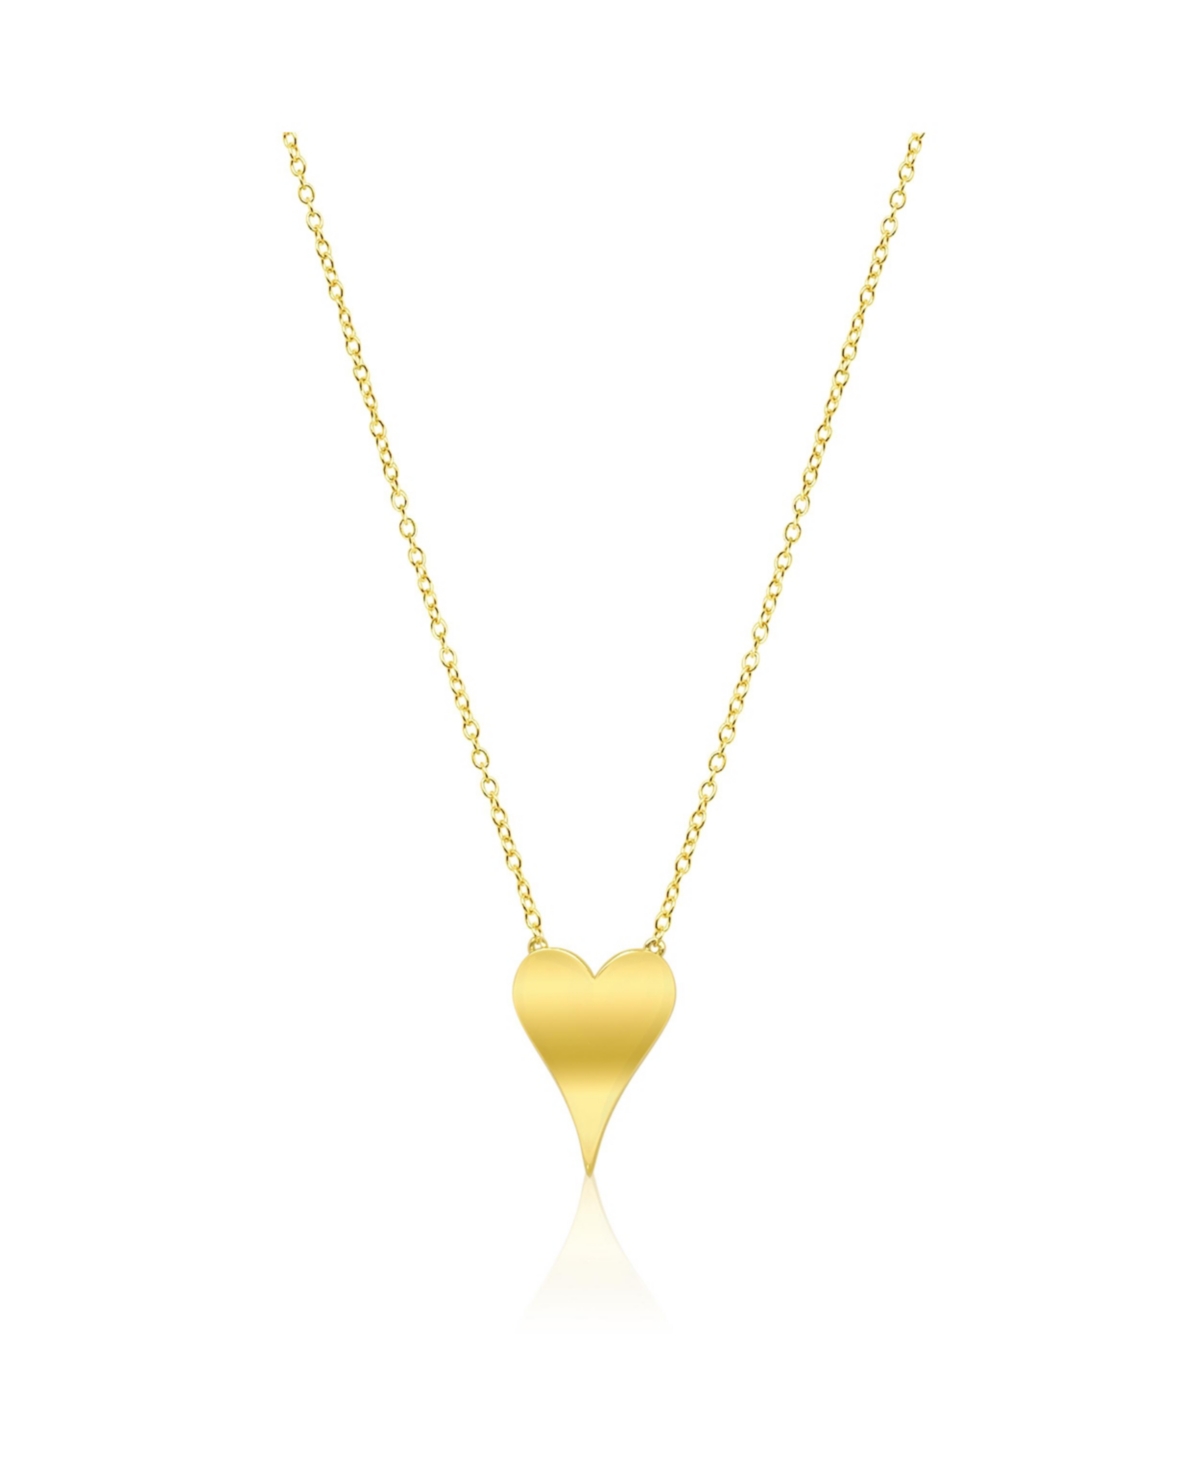 Yellow Gold Tone Elongated Heart Necklace - Yellow